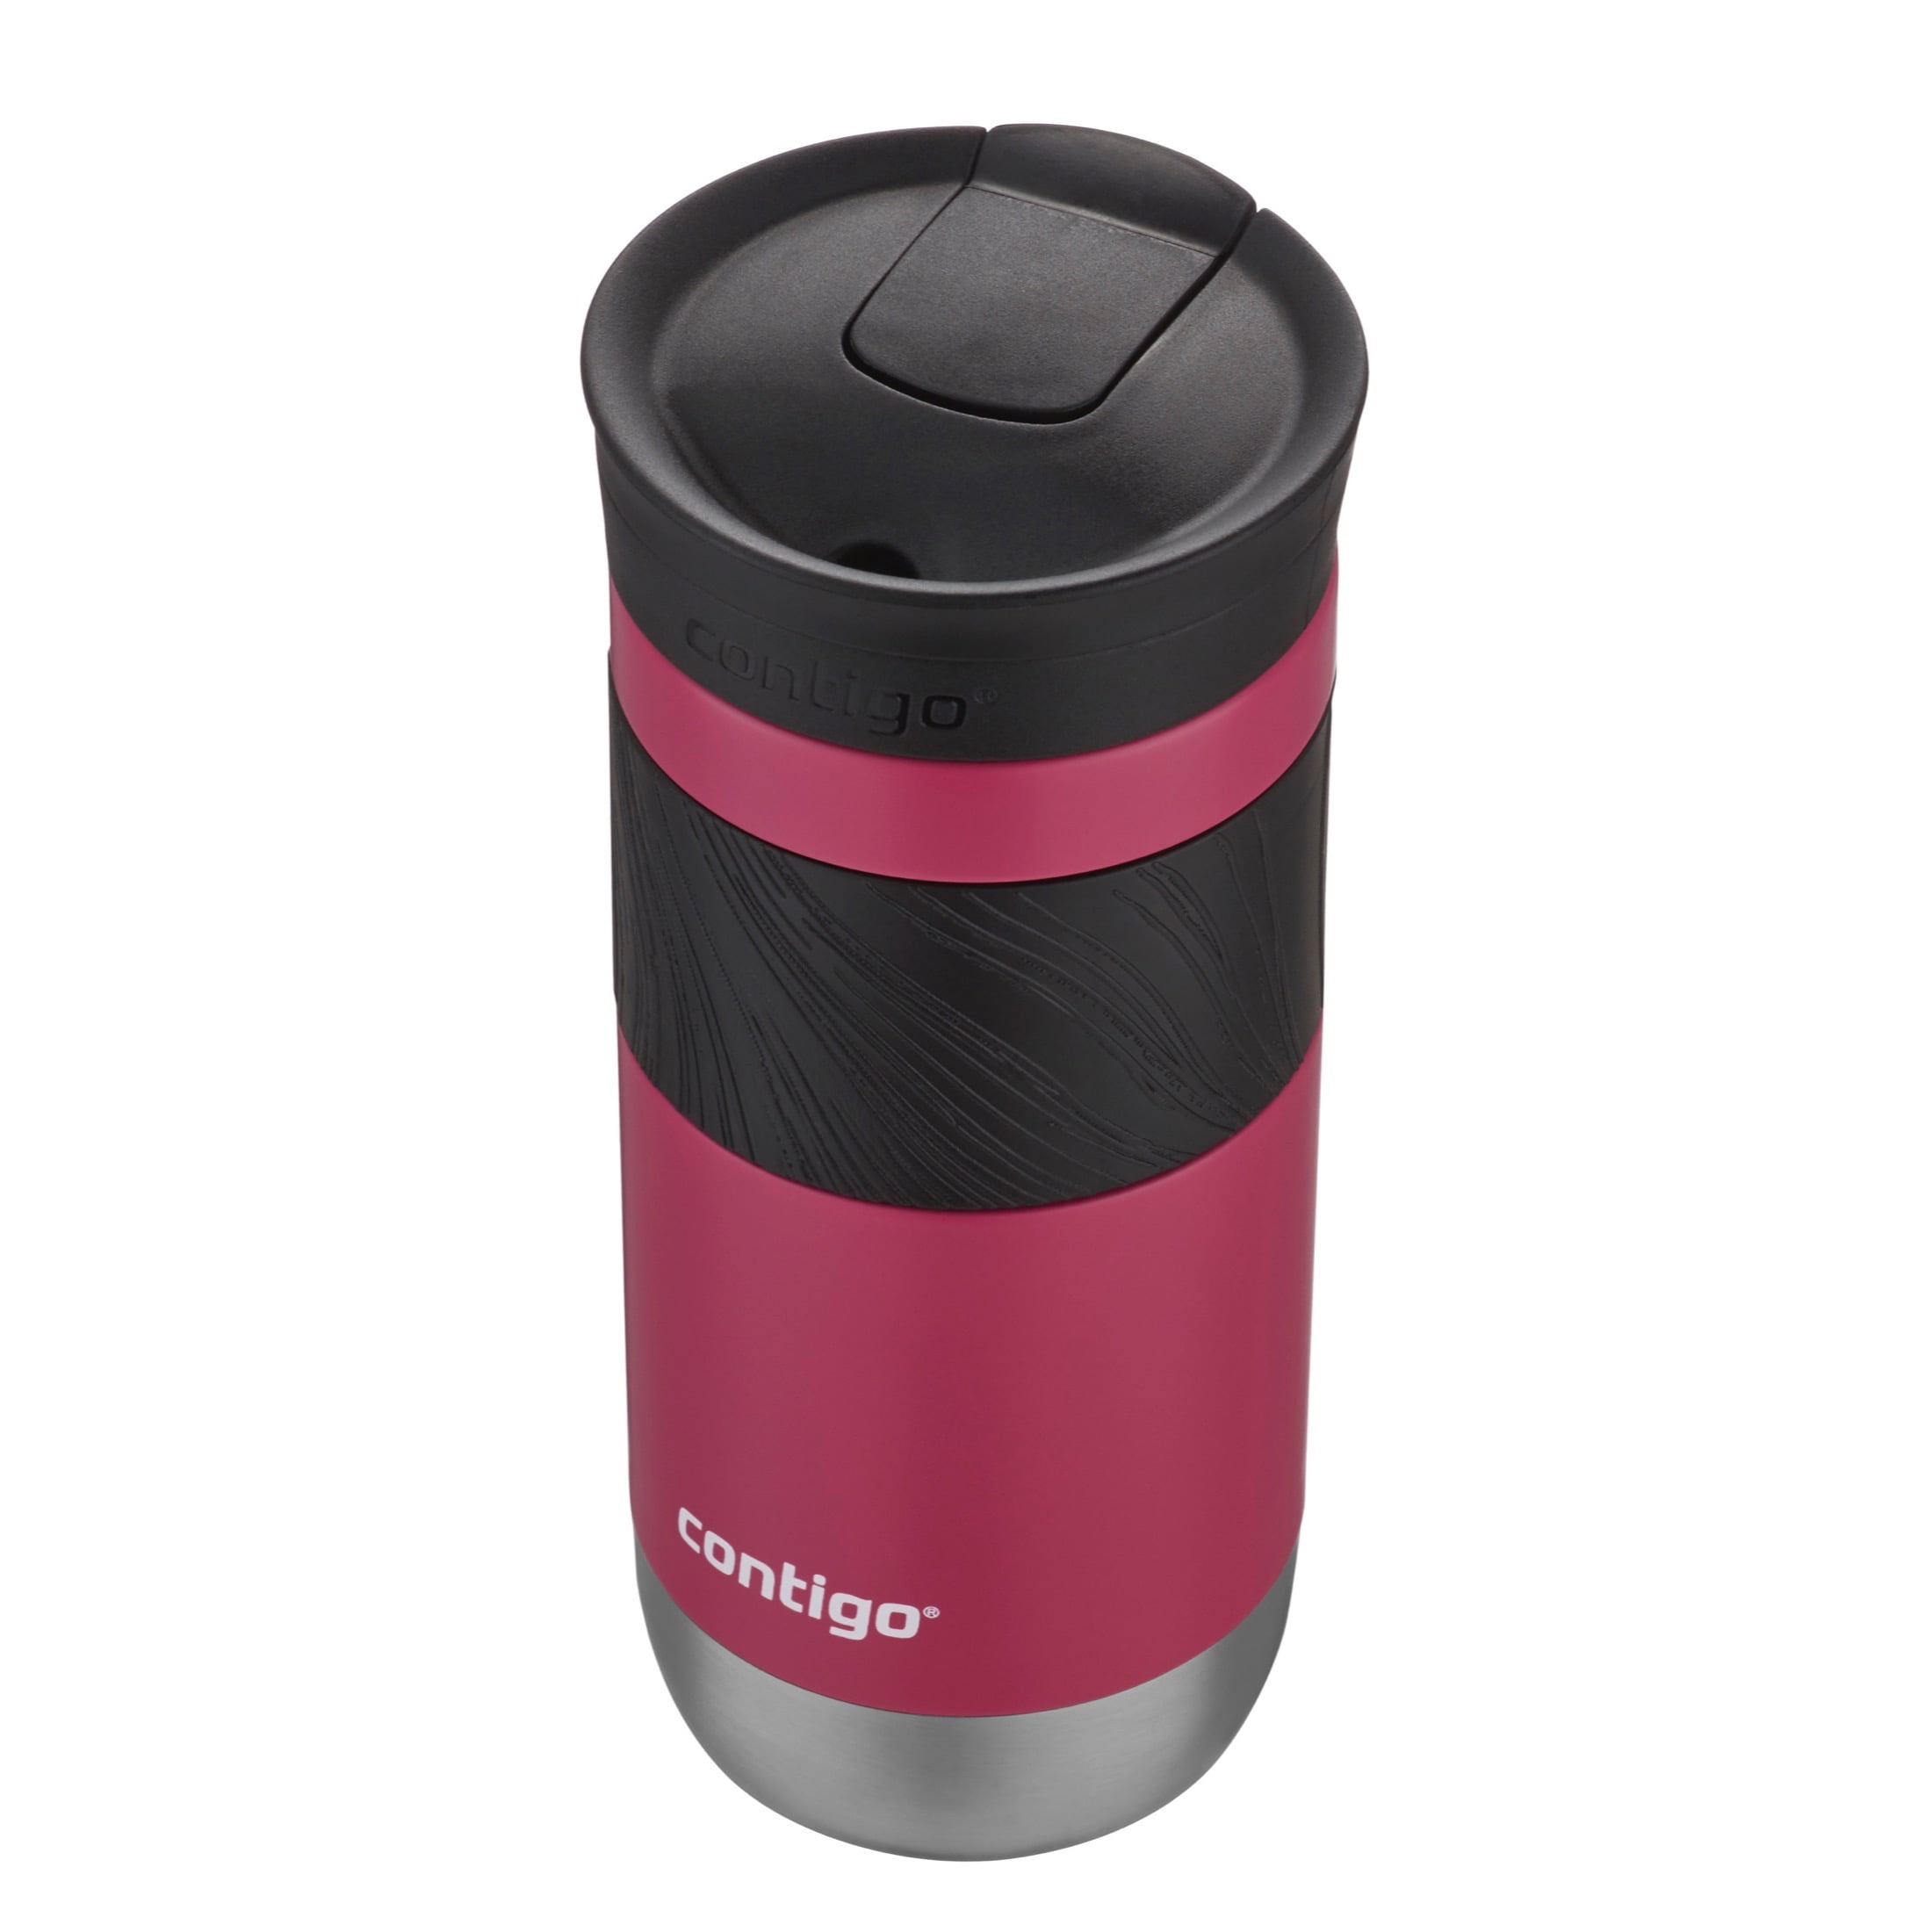 Contigo Byron 2.0 Stainless Steel Travel Mug with SNAPSEAL Lid and Grip  Sake and Blue Corn, 16 fl oz., 2-Pack 